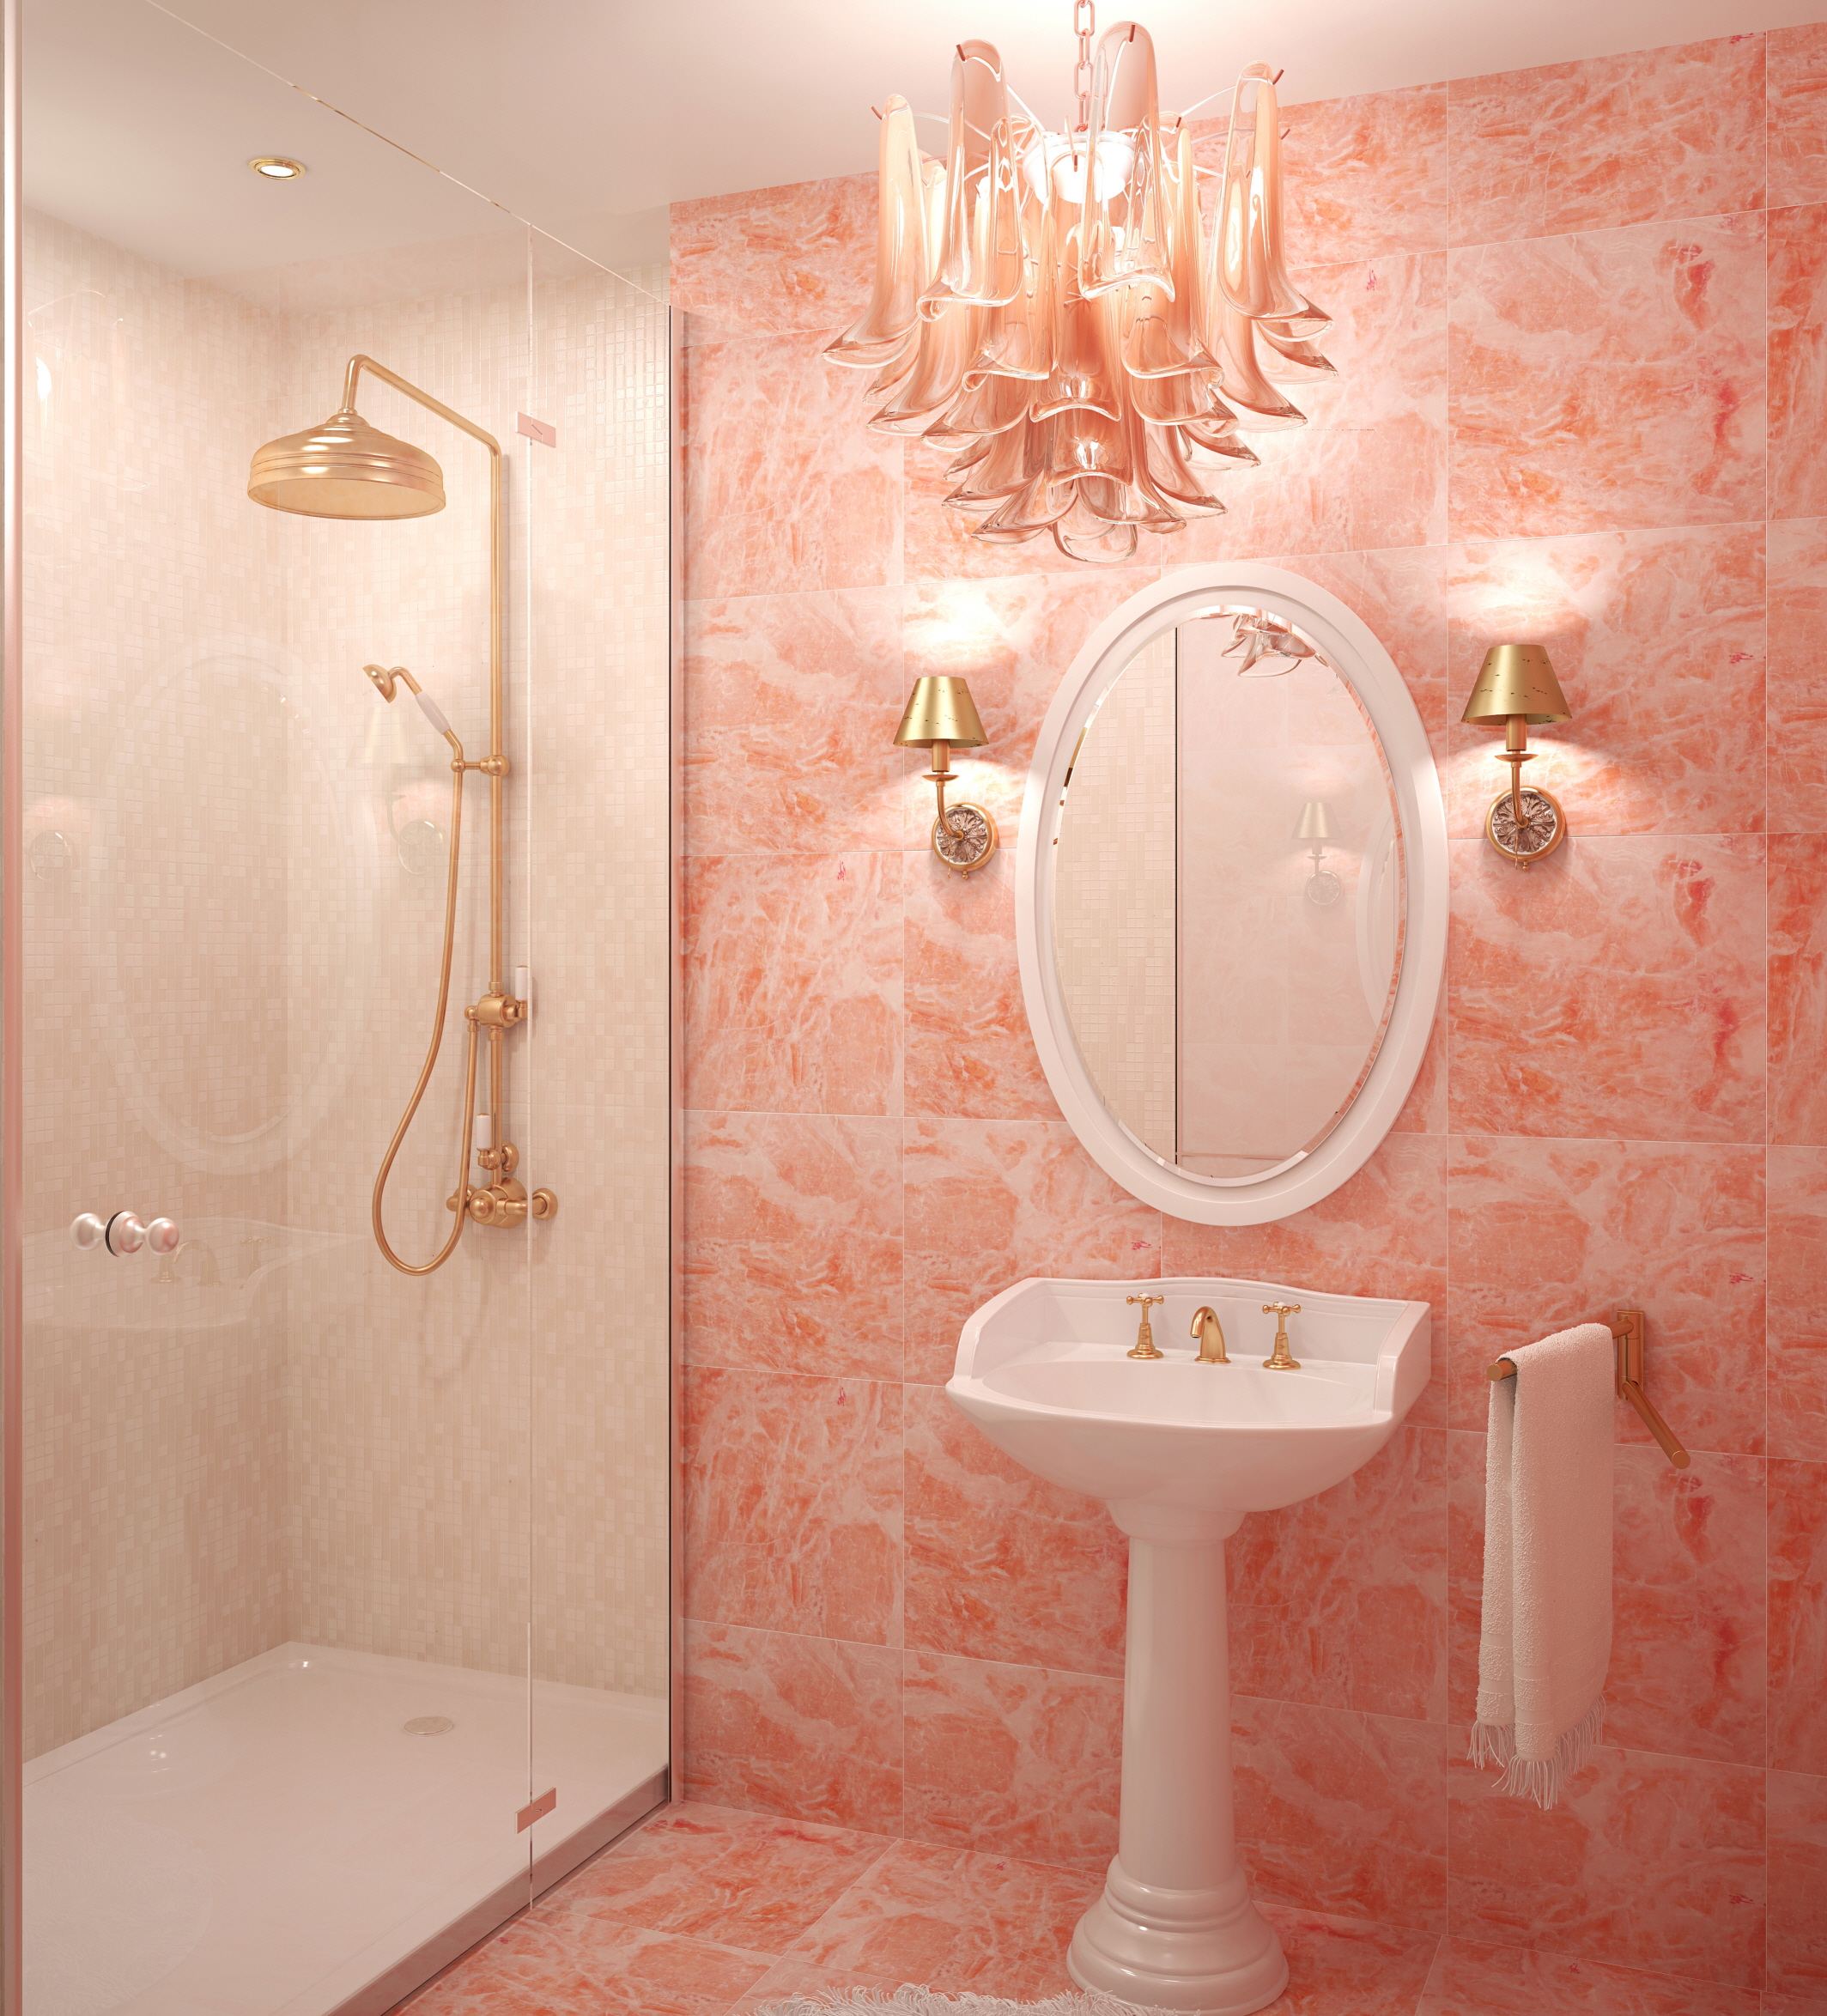 Rosy pink brings a romantic feel to bathrooms, complemented by gold accents for a glamorous touch and plush textiles for added luxury and comfort.